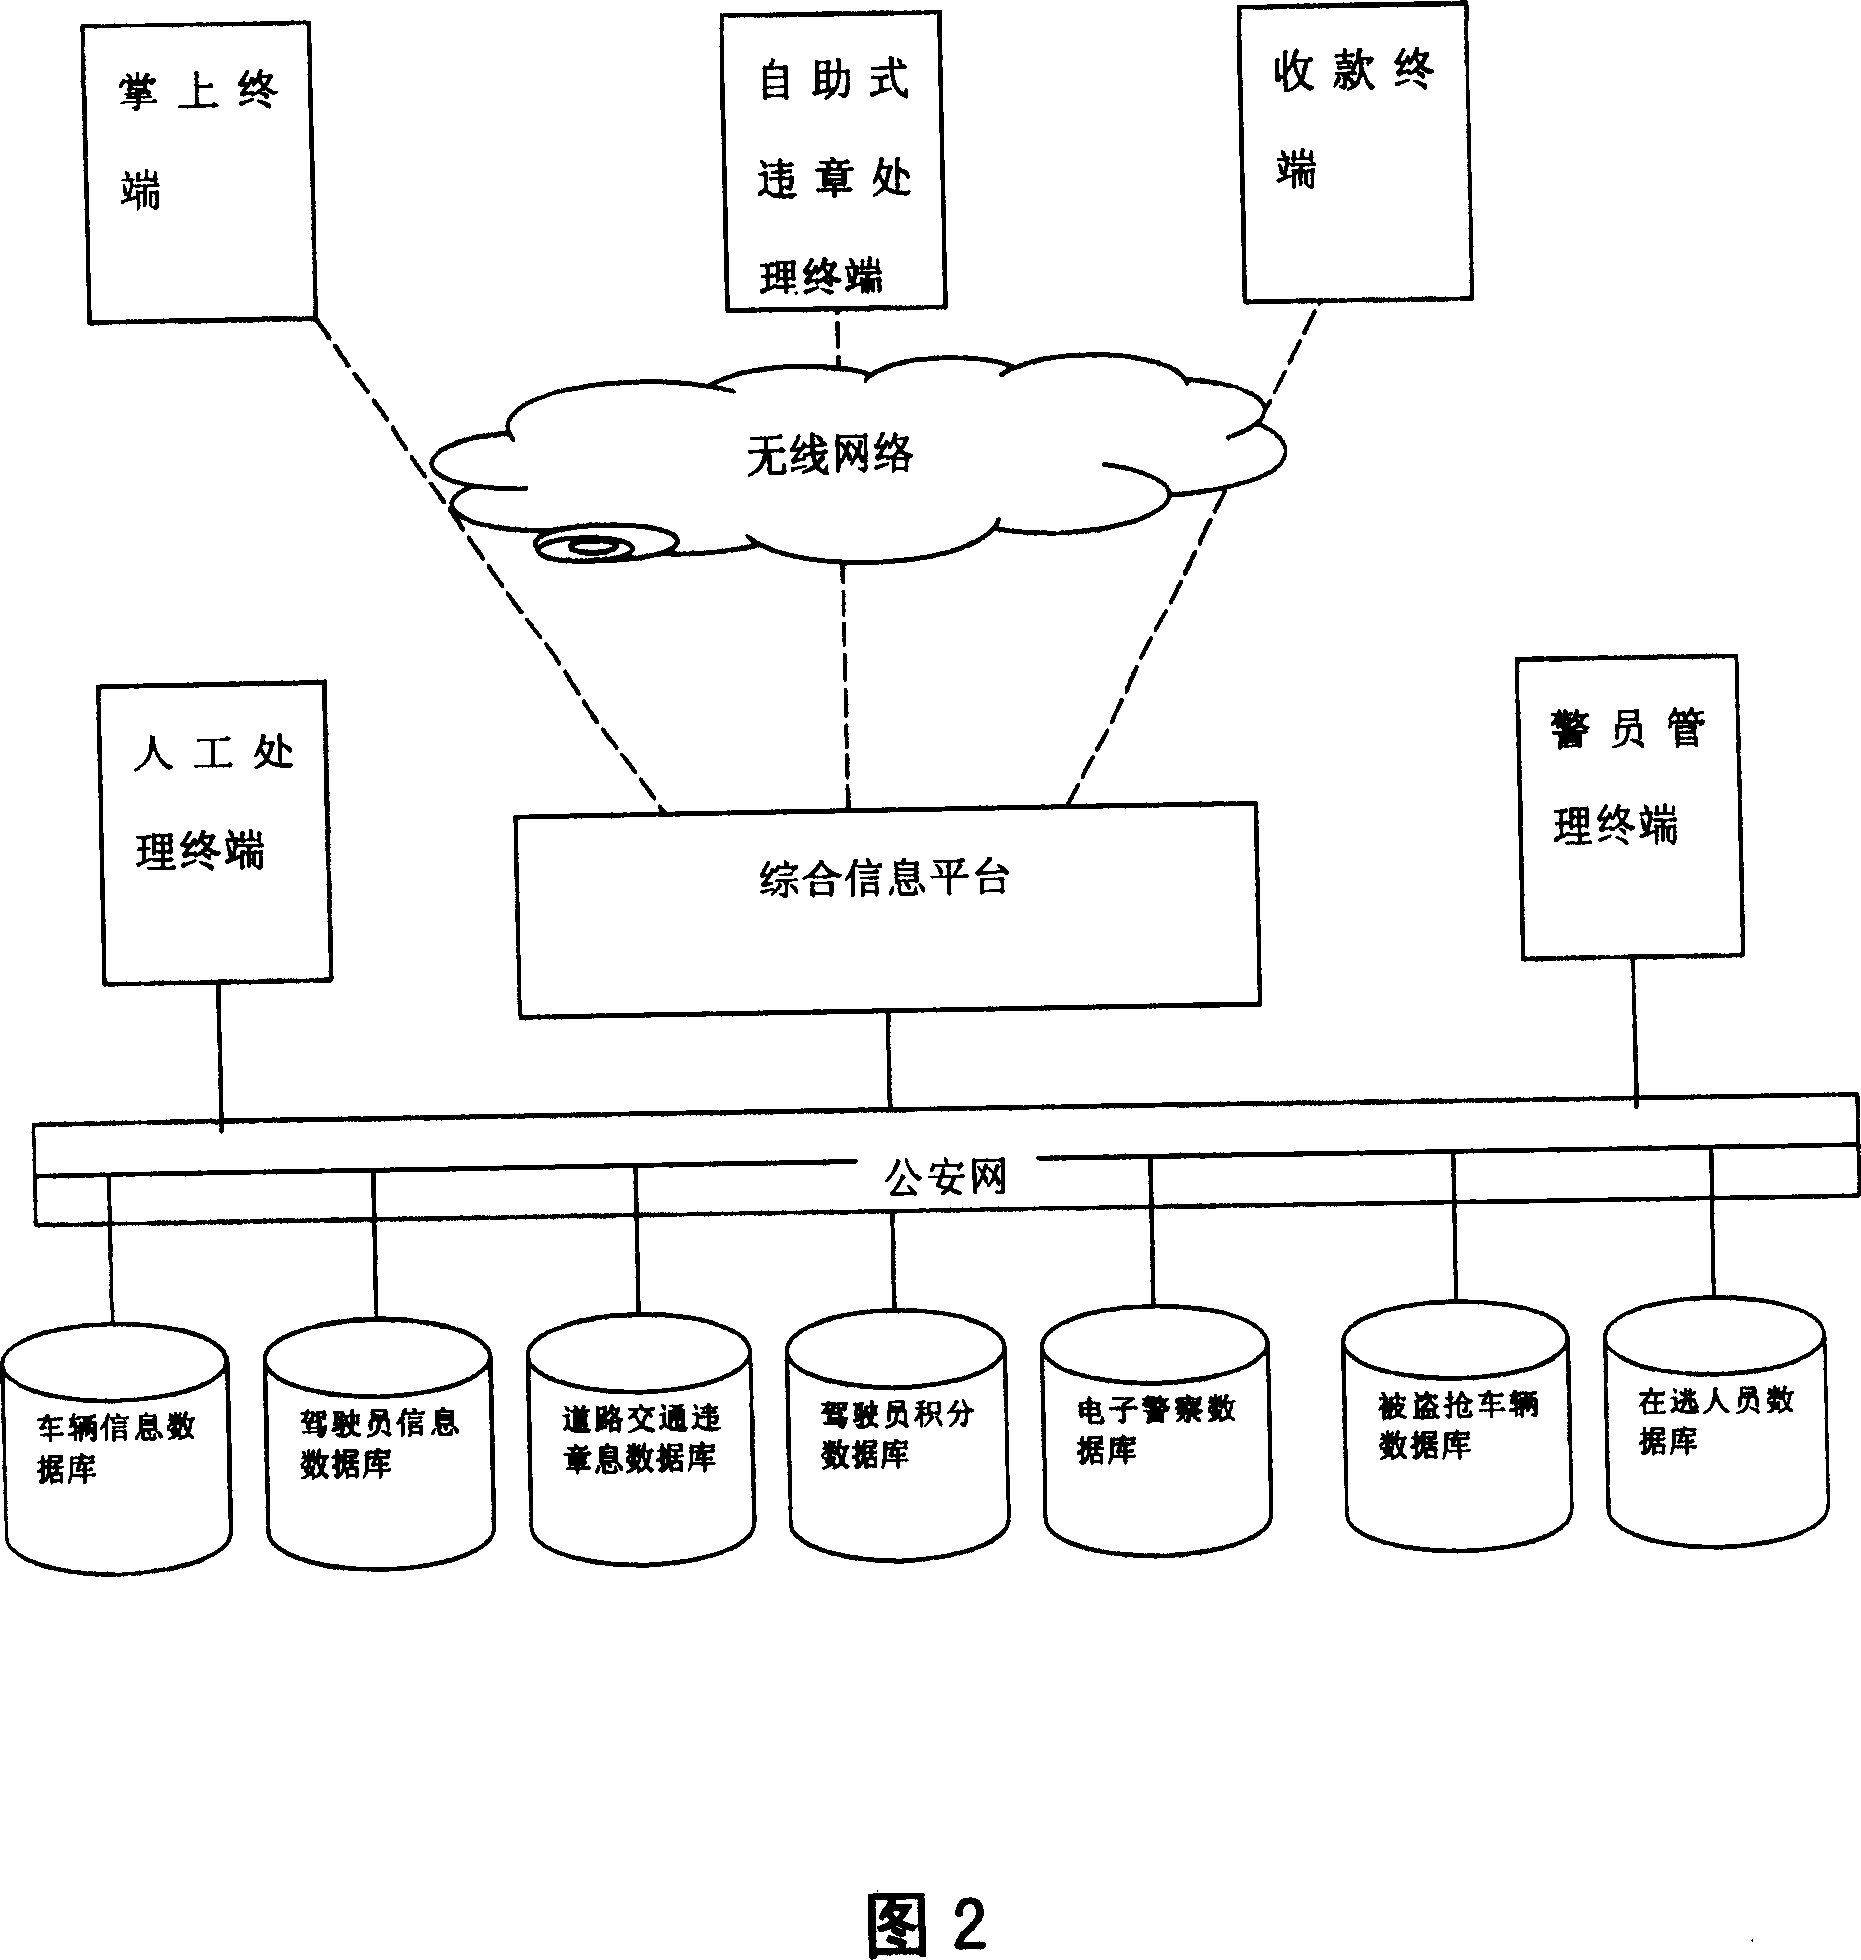 System and method for realizing traffic violation information processing utilizing wireless network